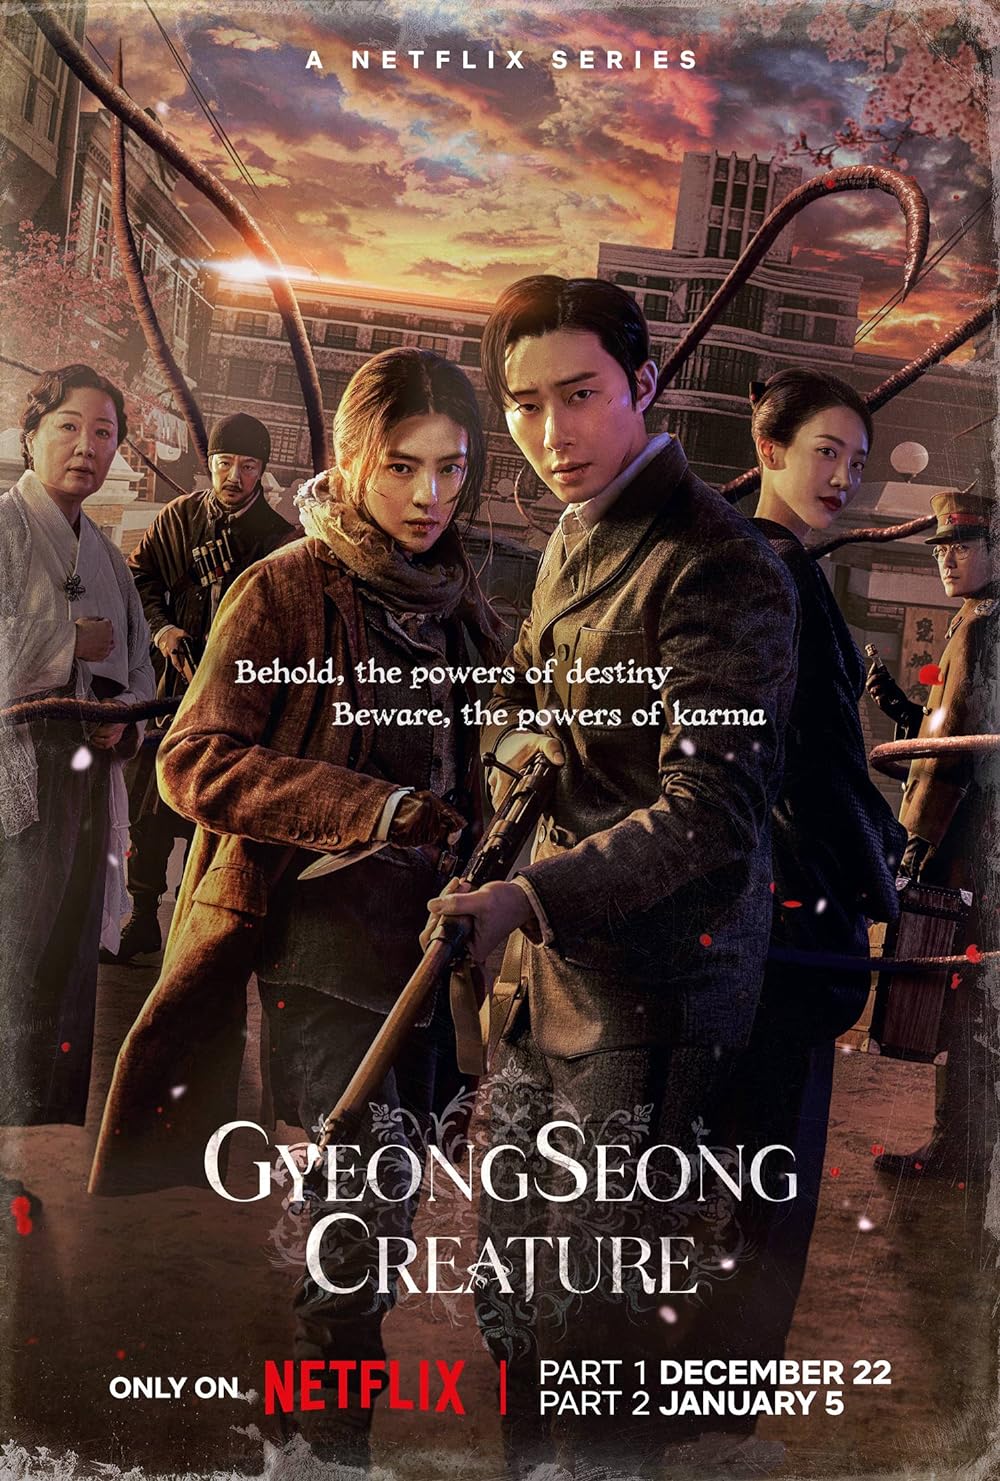 Gyeongseong Creature (December 22) - Streaming on NetflixSet in 1945 during Korea’s colonial rule, 